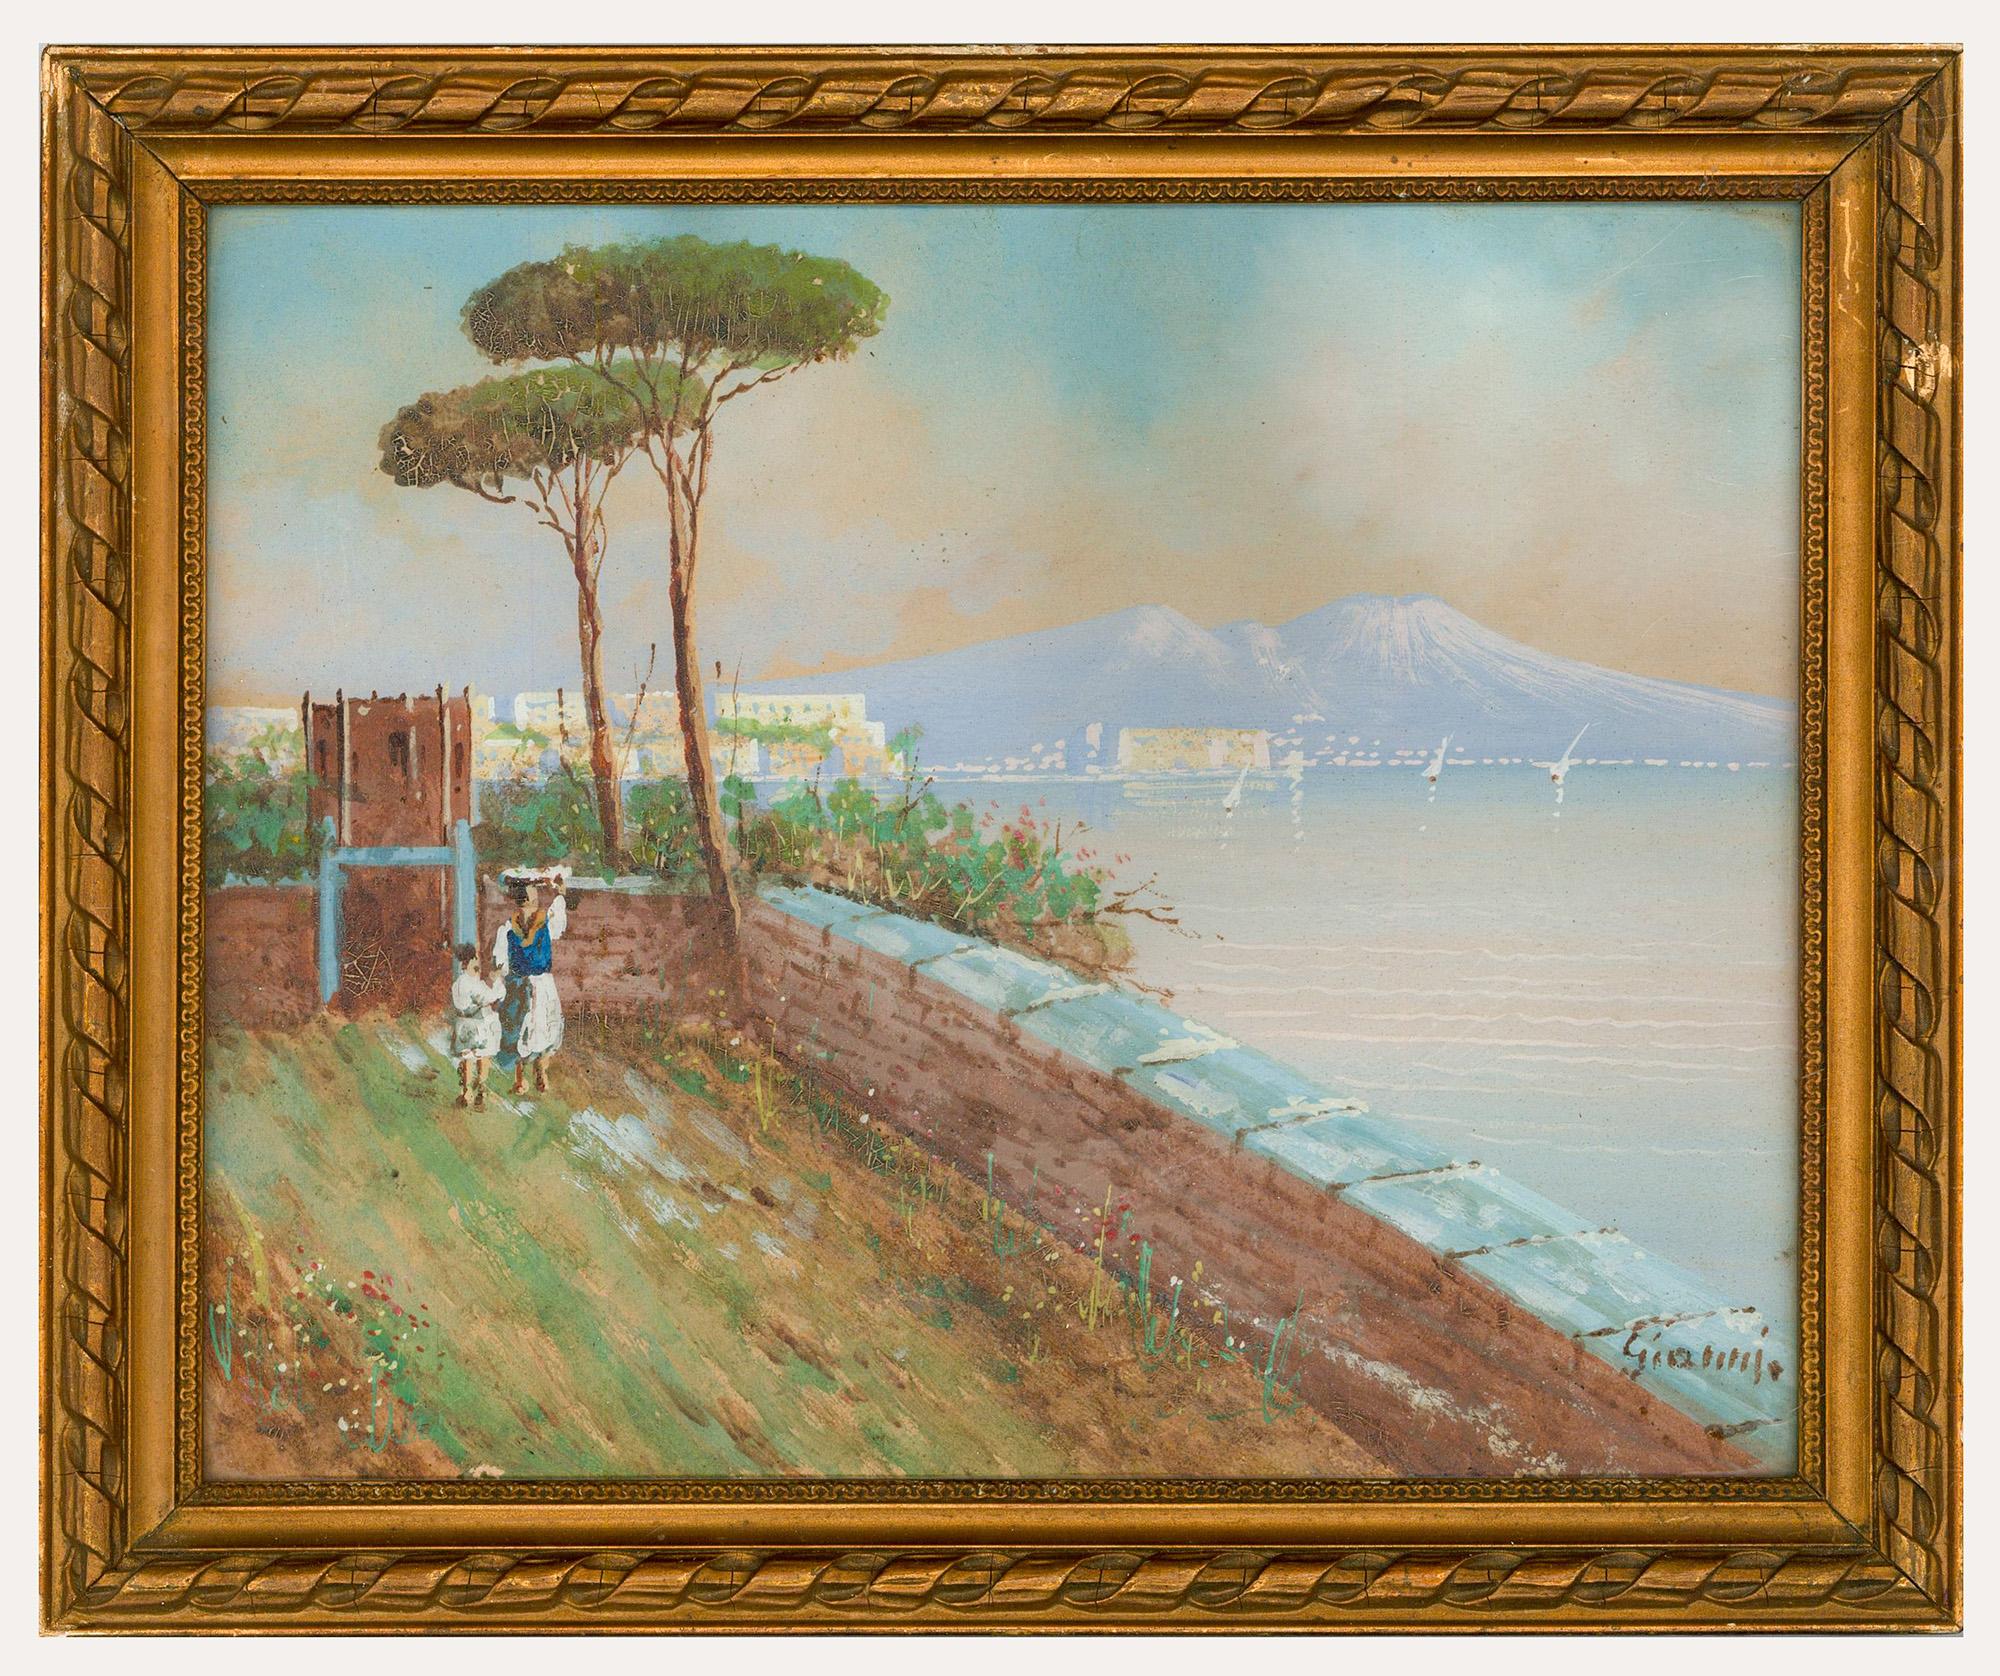 A charming gouache scene depicting a mother and child walking a walled terrace. The views looks out over a peaceful Mediterranean sea with mountains in the distance. Signed to the lower right. Presented in a gilt frame with a ribbon and stick